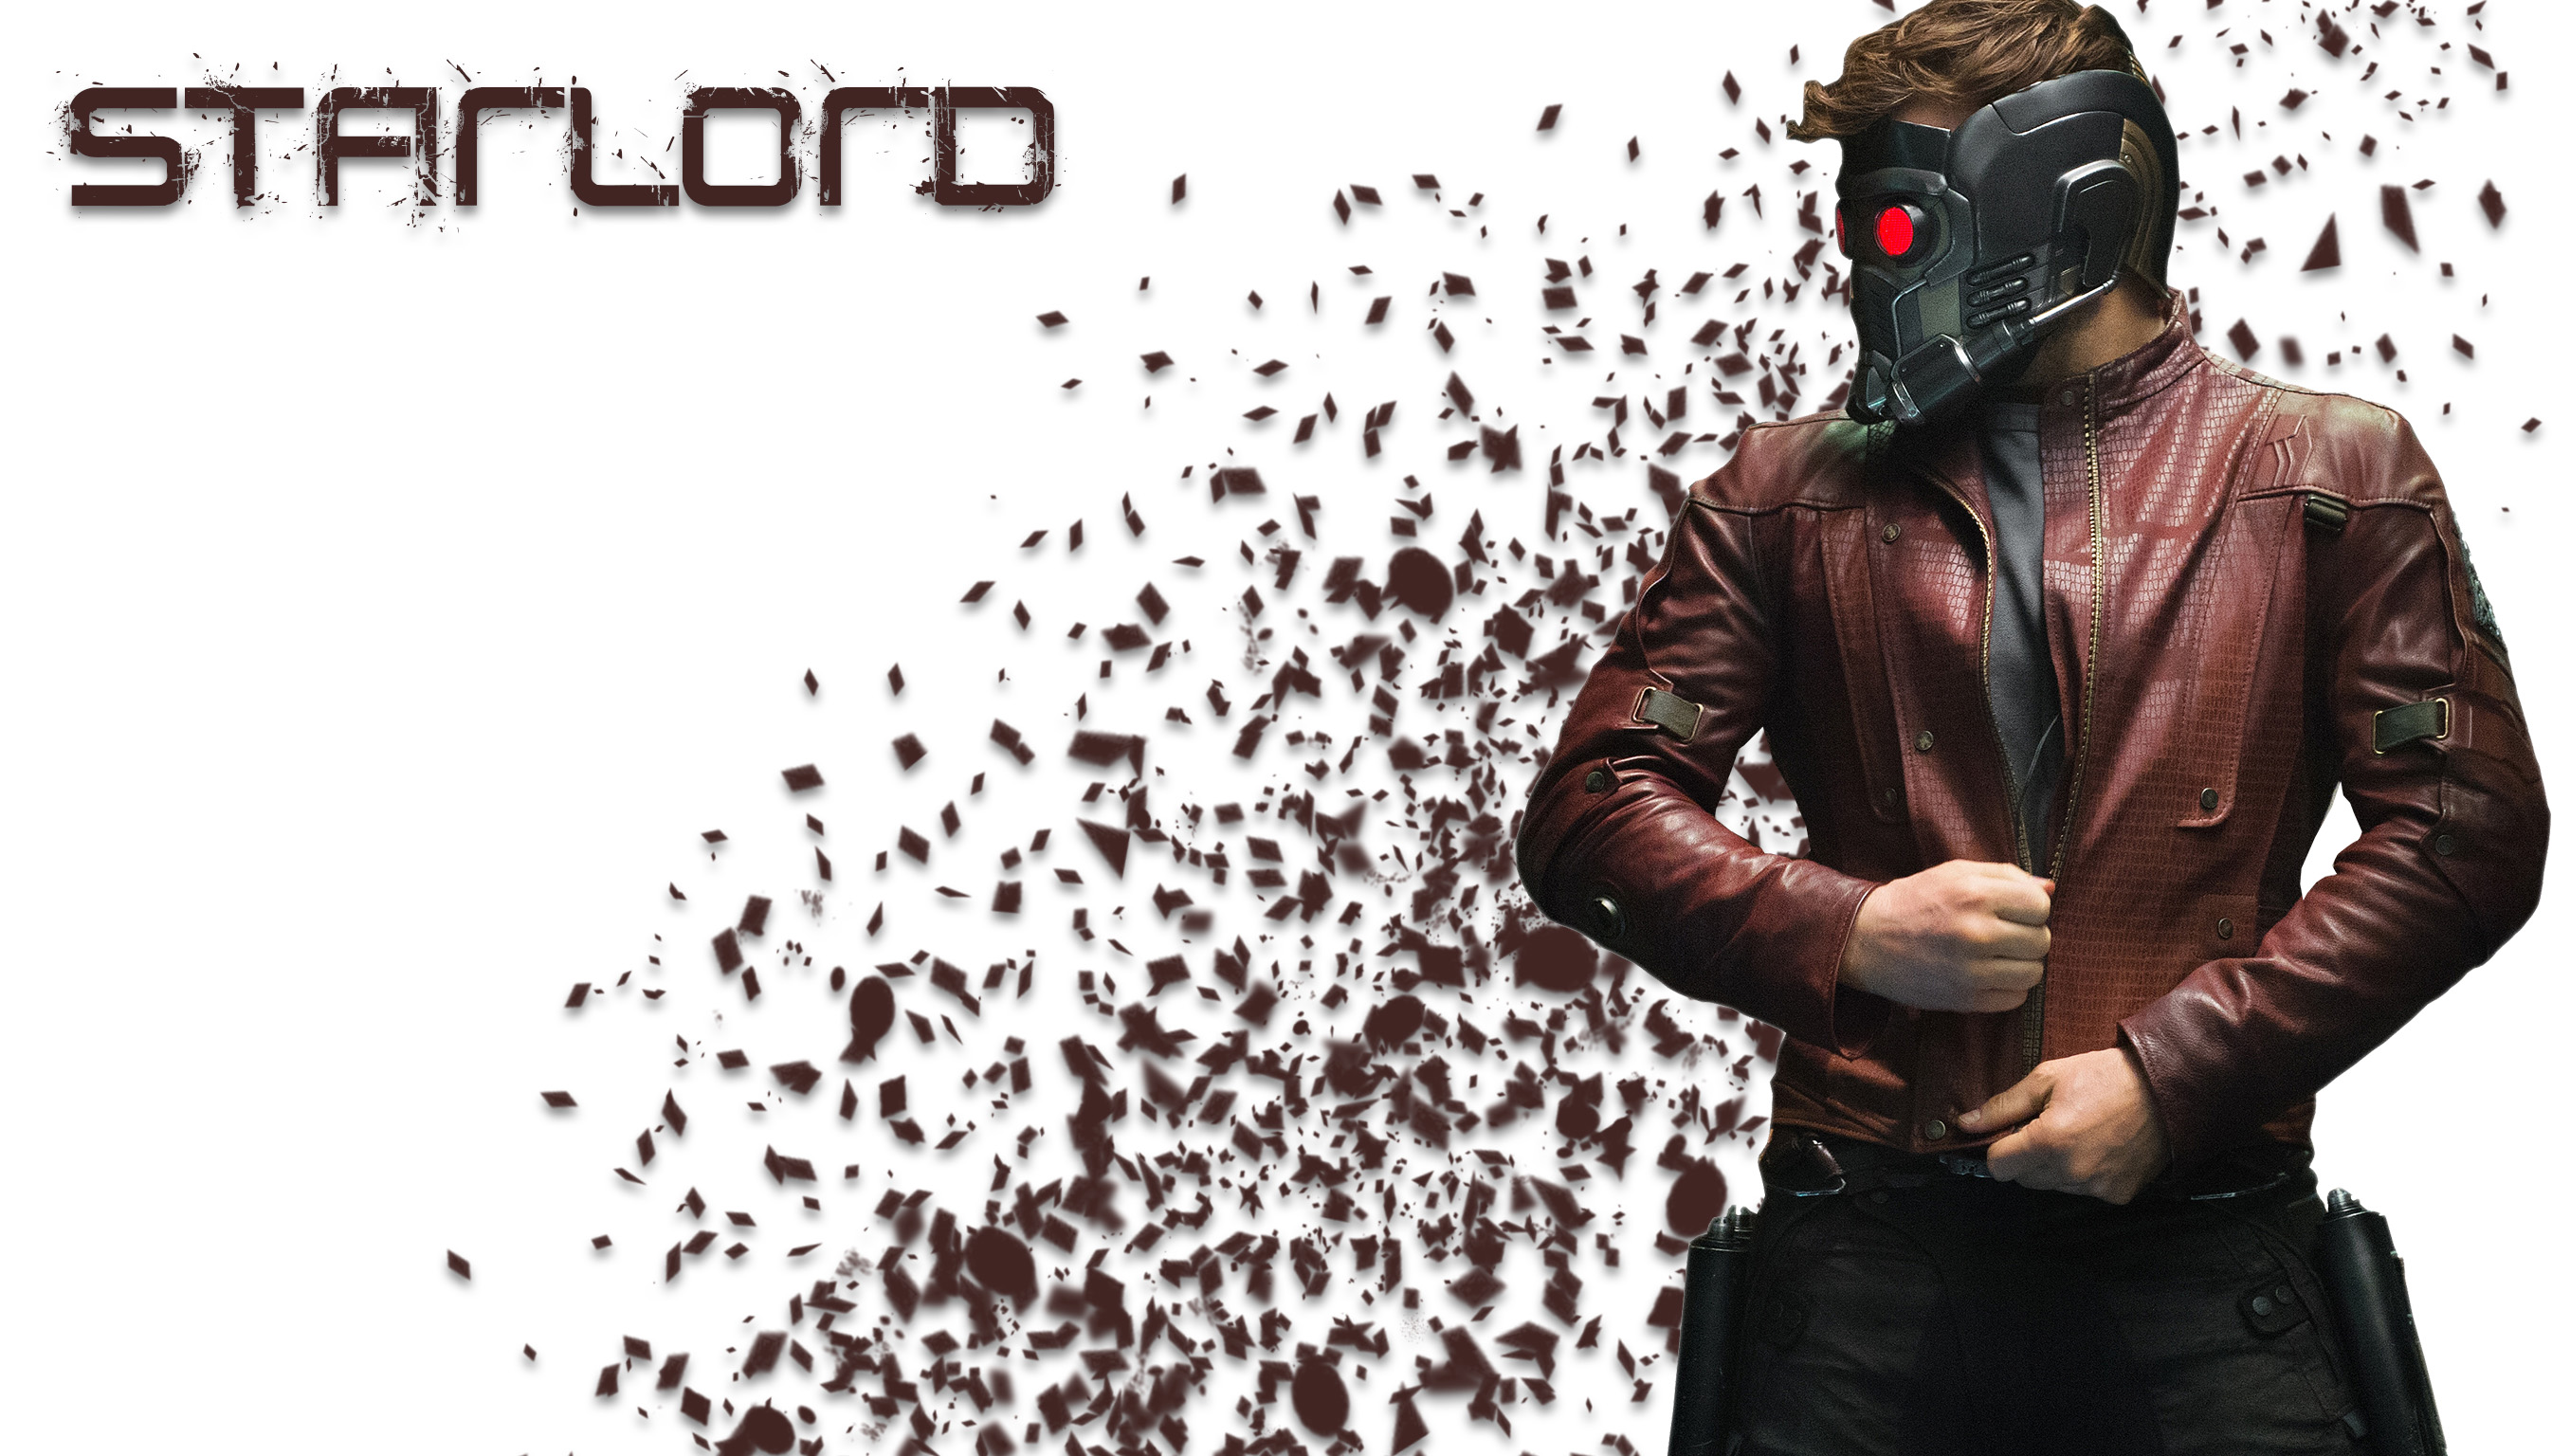 People 2692x1536 Avengers: Infinity war Star-Lord Guardians of the Galaxy The Avengers Marvel Comics men digital art simple background